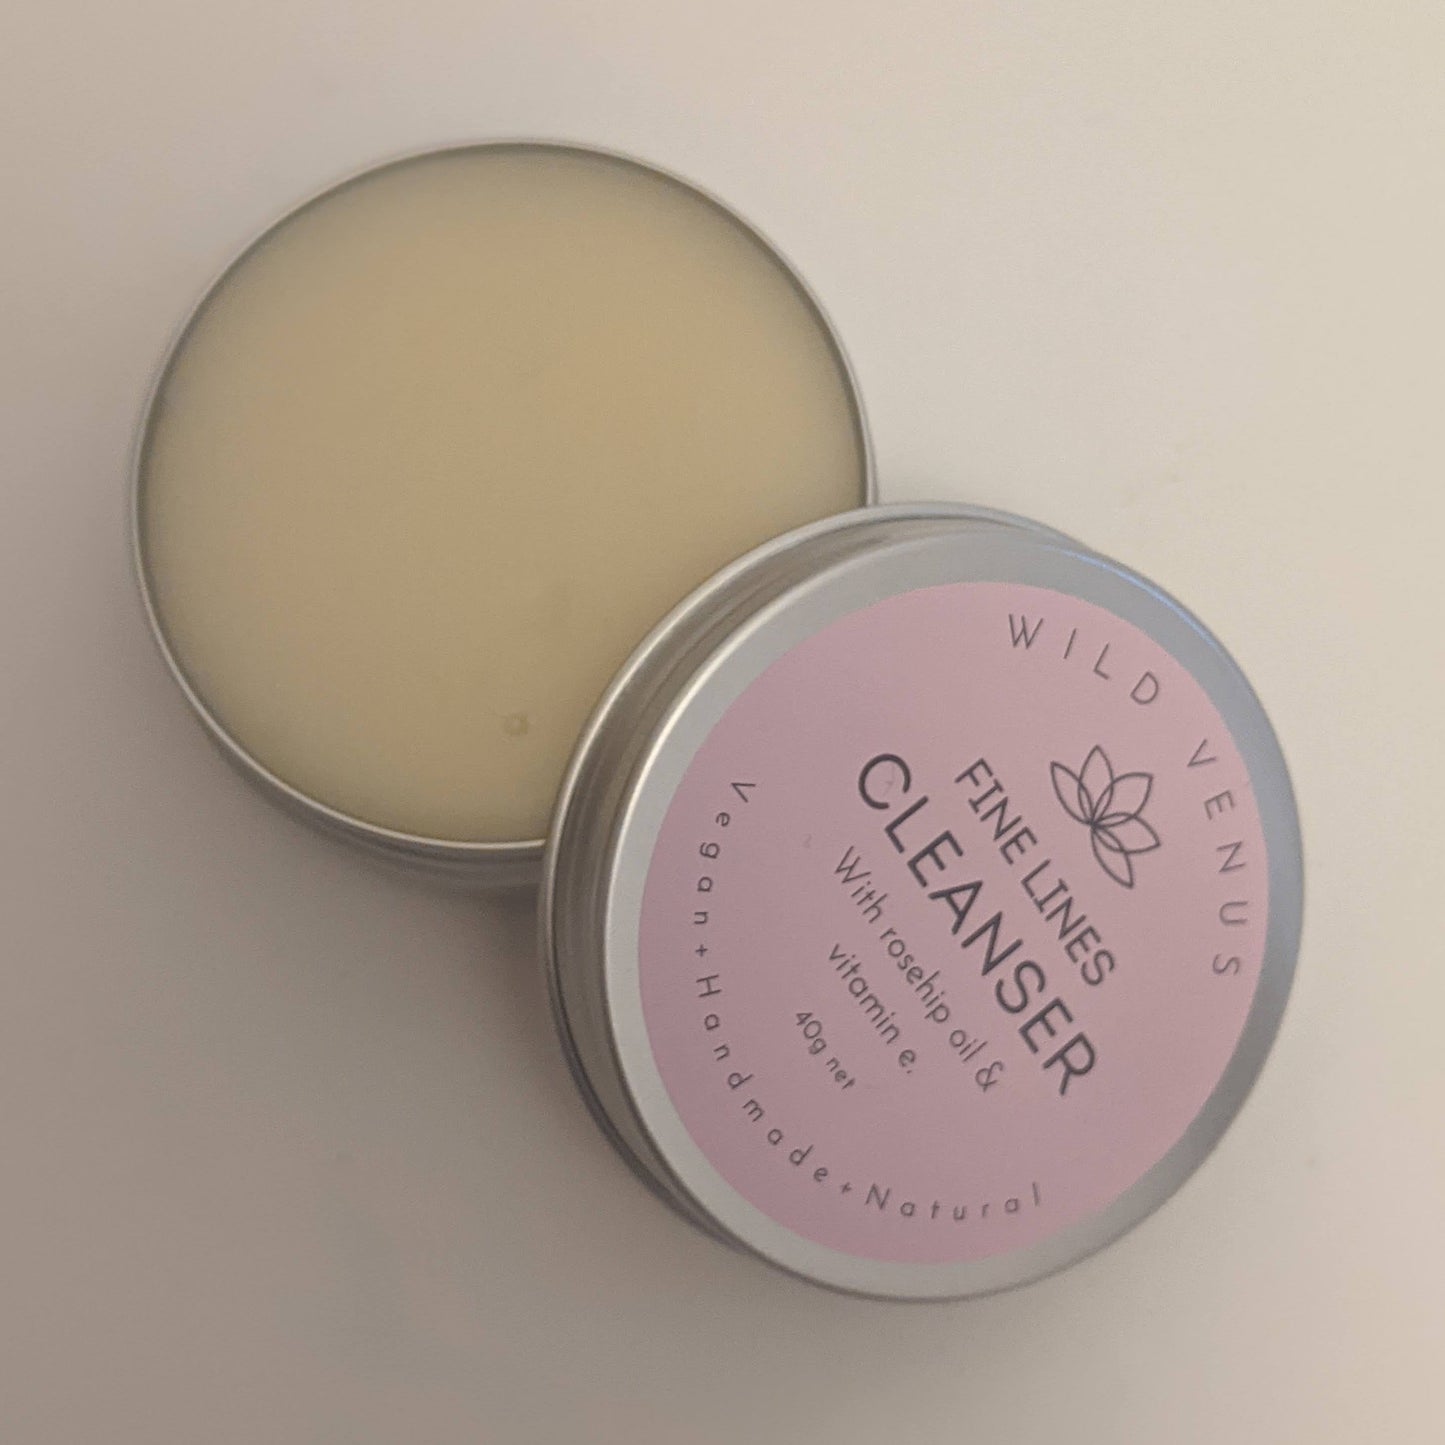 A open pot of the Wild Venus Fine Lines Cleansing Balm on a white background.